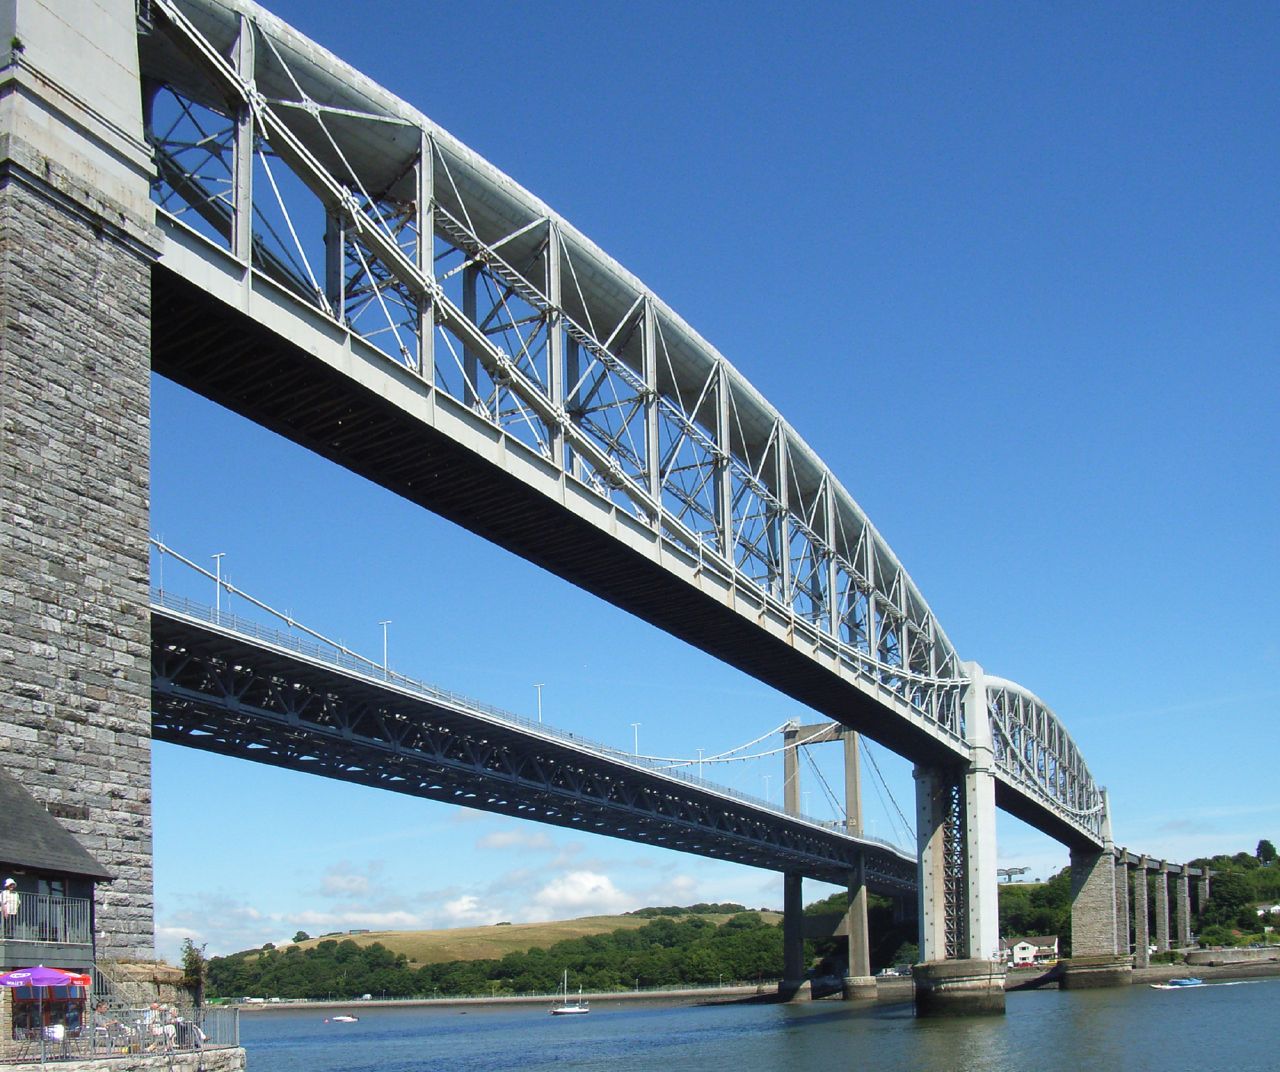 the bridge spanning over a body of water